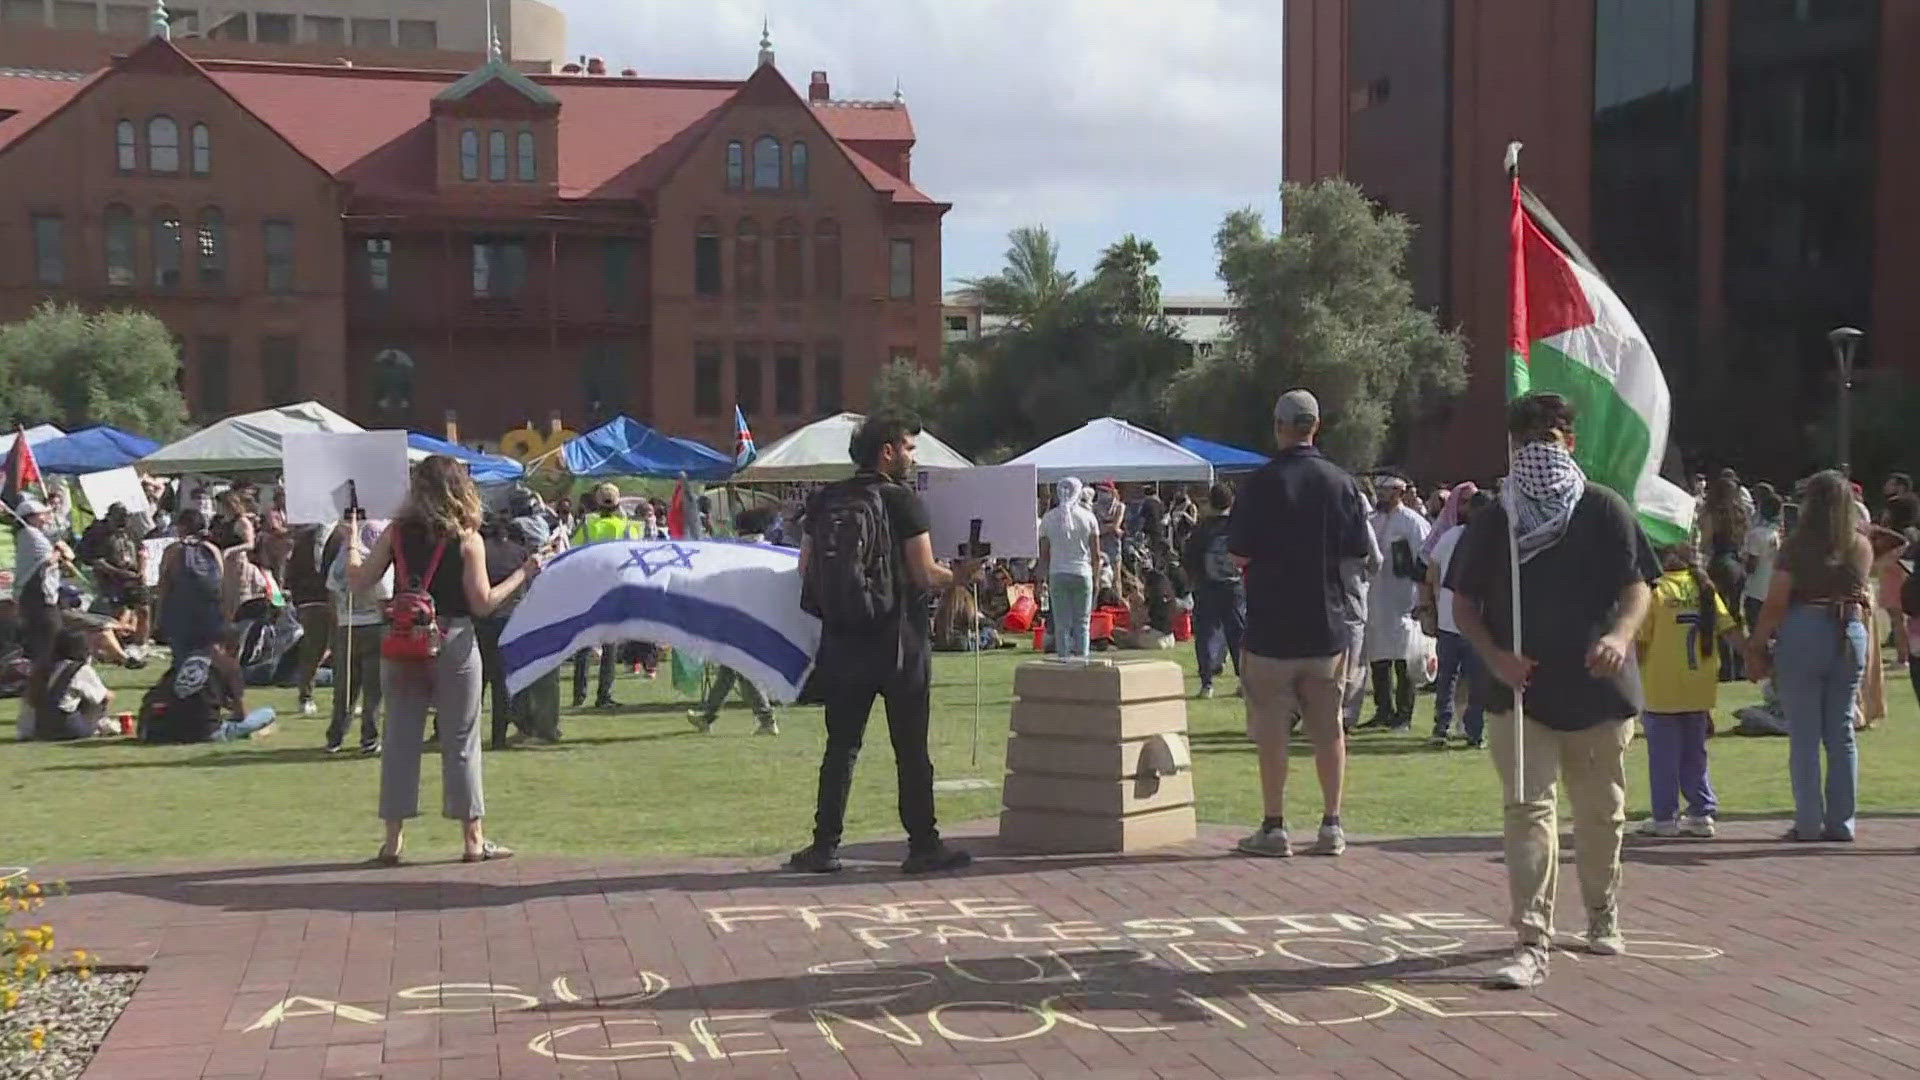 Pro-Palestine protesters gathered near the lawn in front of the Old Main building on Arizona State University's Tempe campus. Three people were arrested.